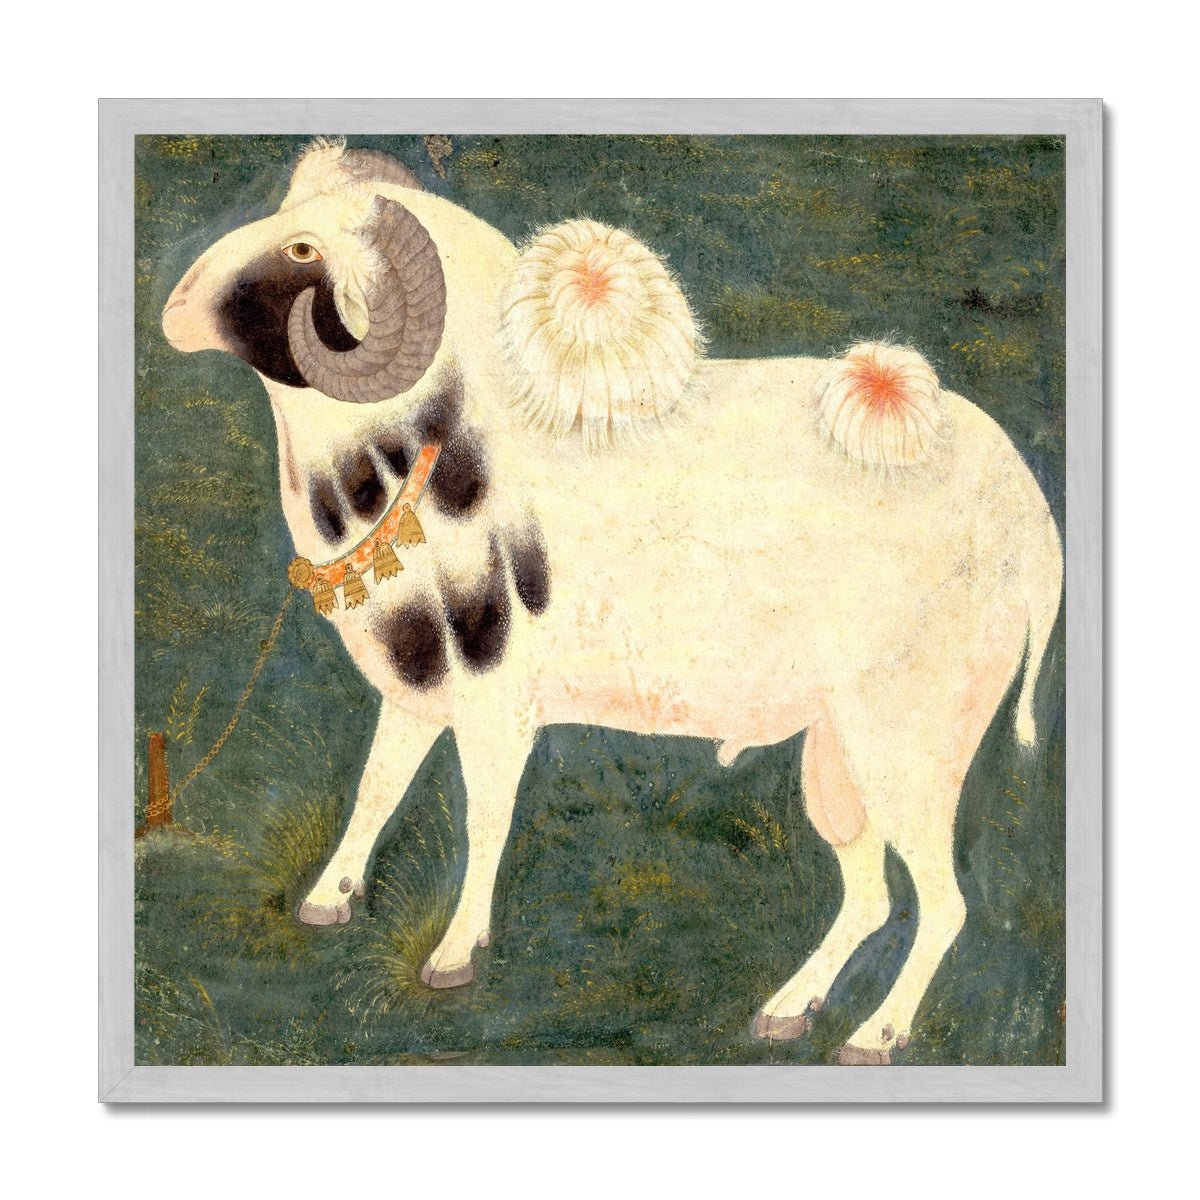 Fine art 12"x12" / Silver Frame Gold Framed Royal Ram with Gold Chain | Antique Watercolor Classical Indian Mughal Pastoral Goat Sheep Horse Framed Art Print